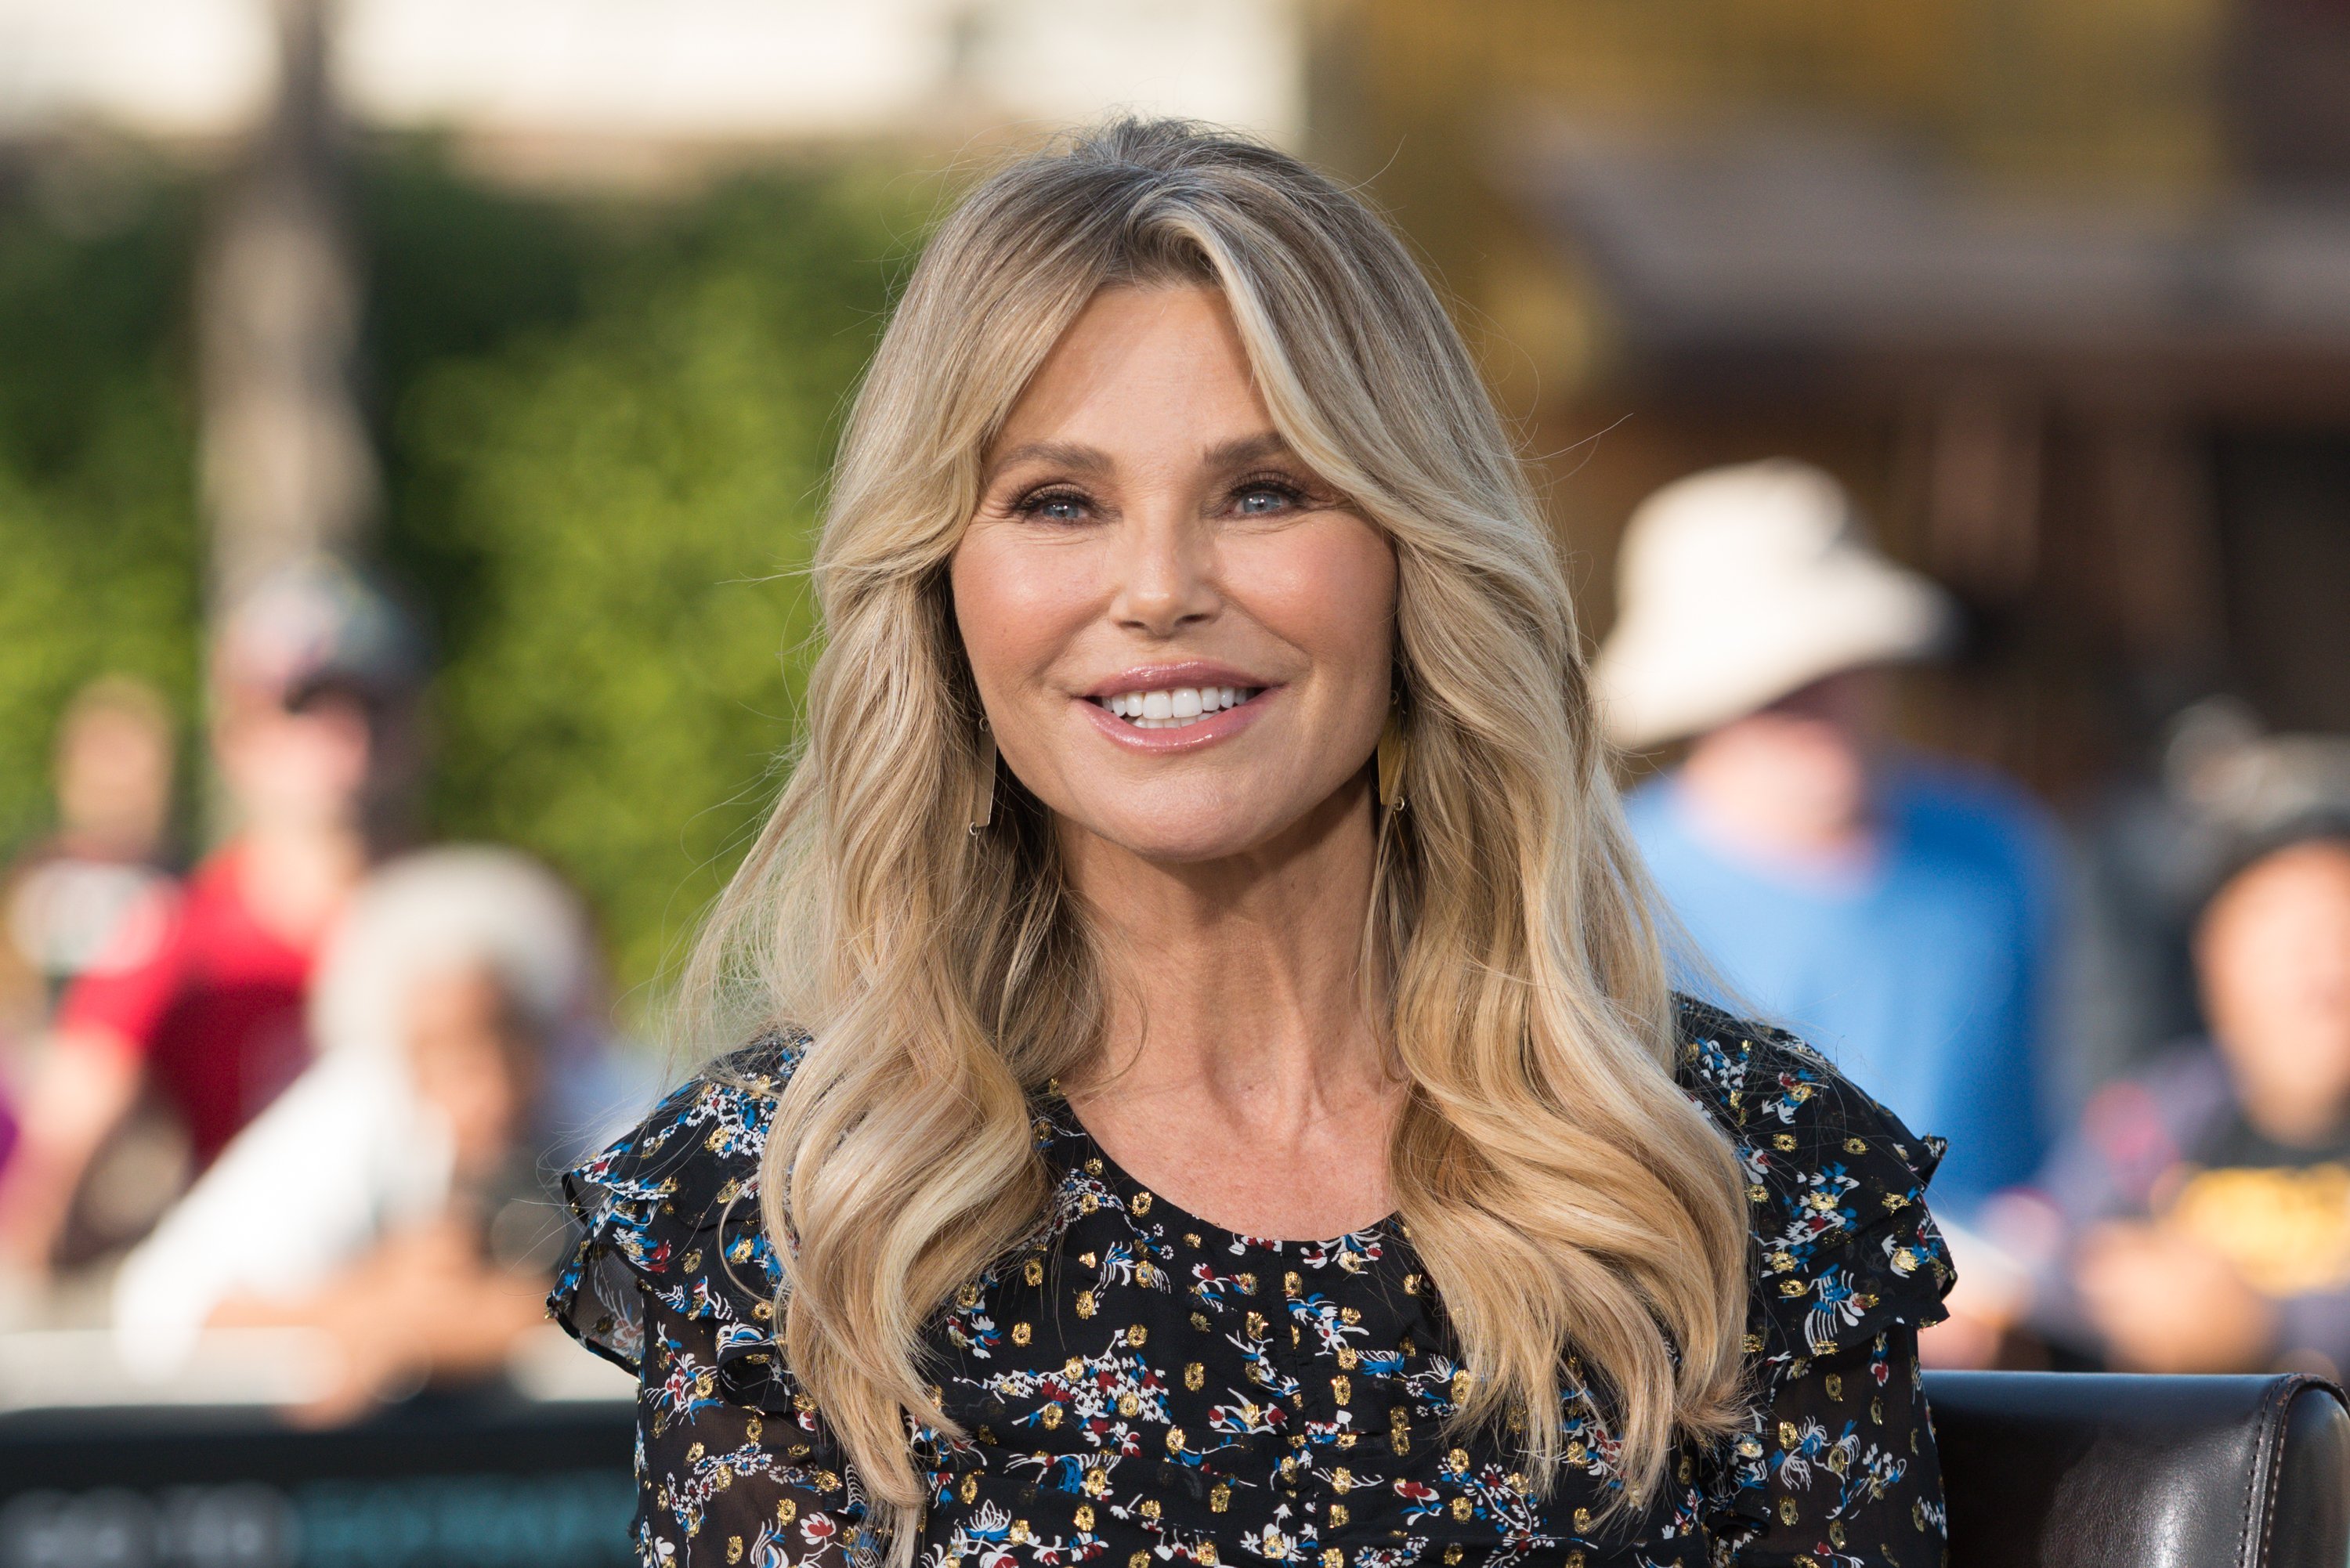 Christie Brinkley visits "Extra" at Universal Studios Hollywood on January 18, 2018 in Universal City, California | Photo: Getty Images